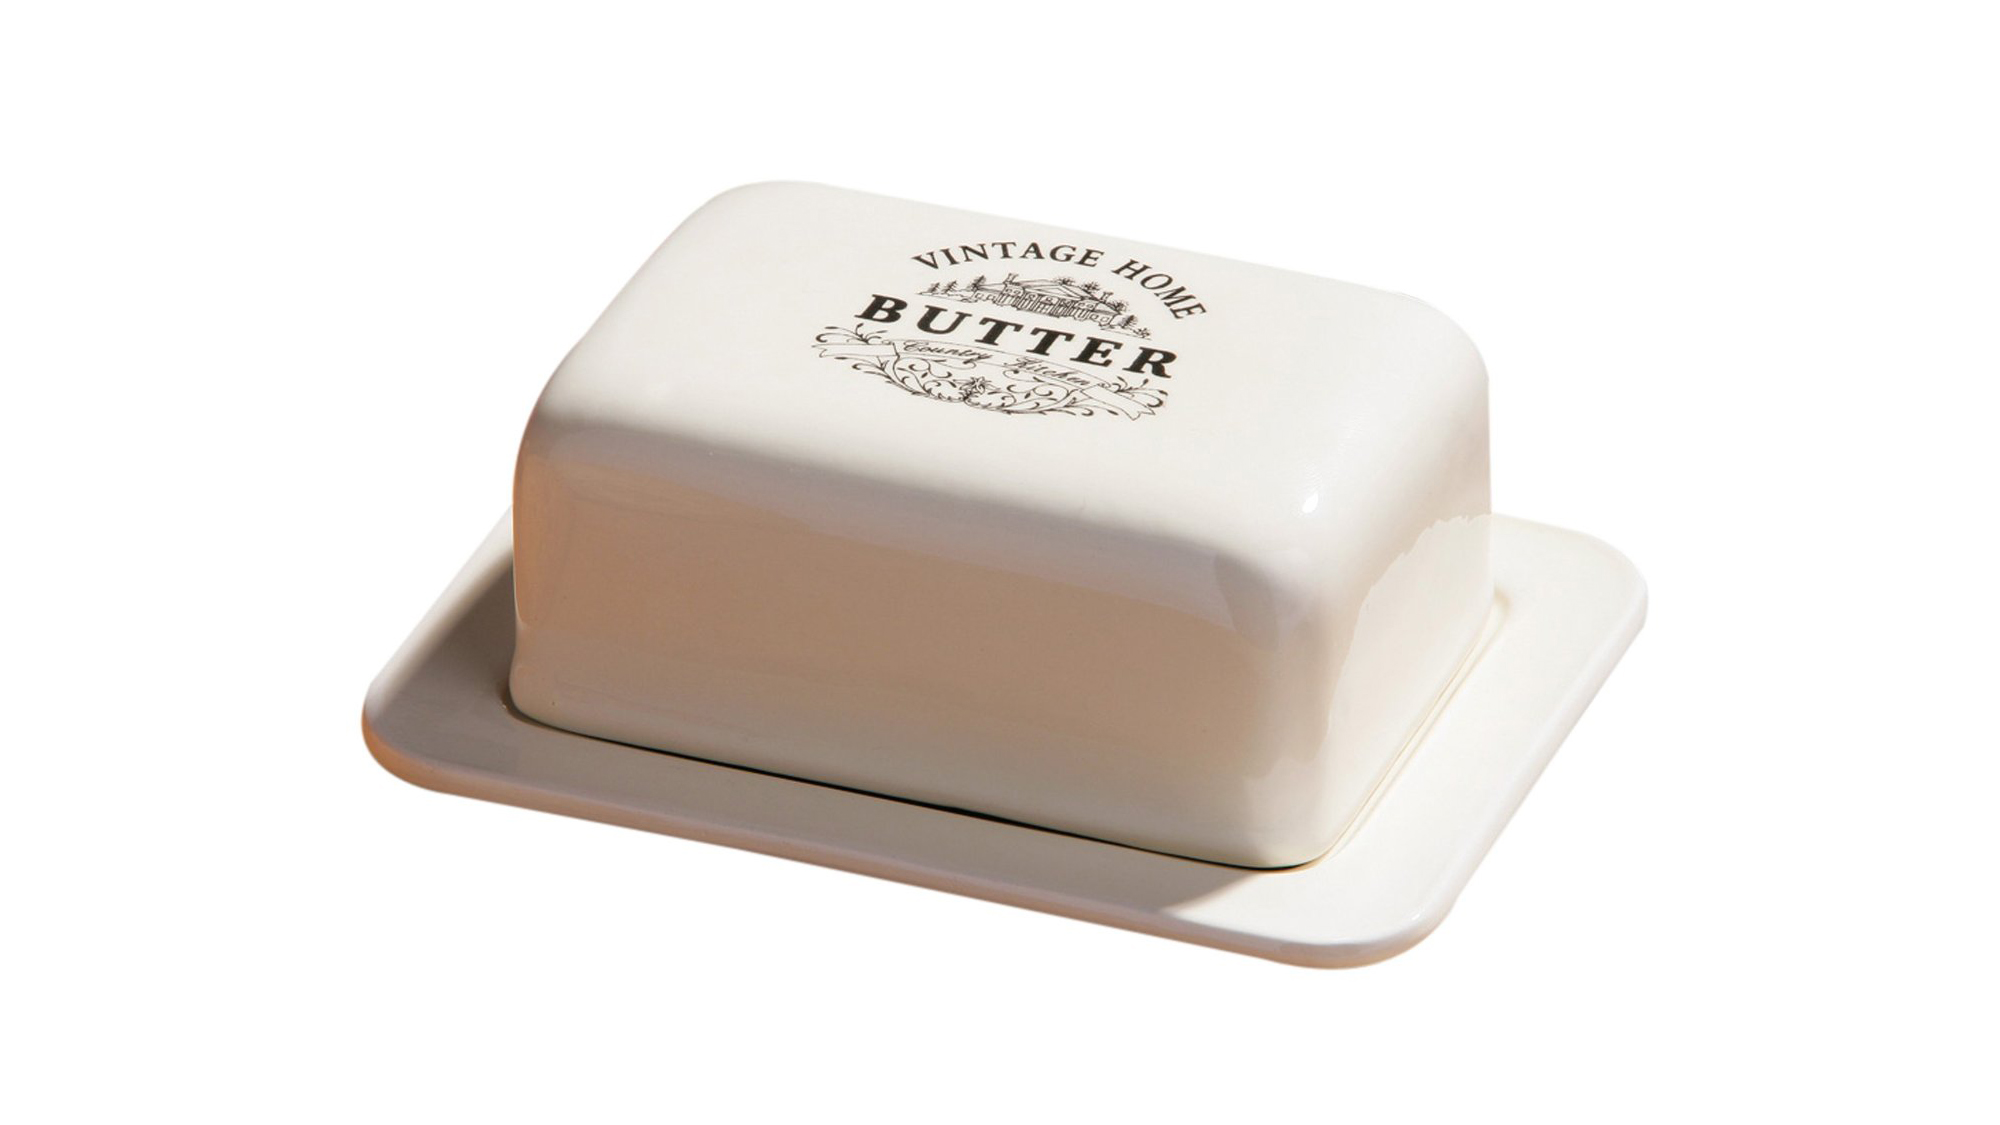 Stop Refrigerating Your Butter